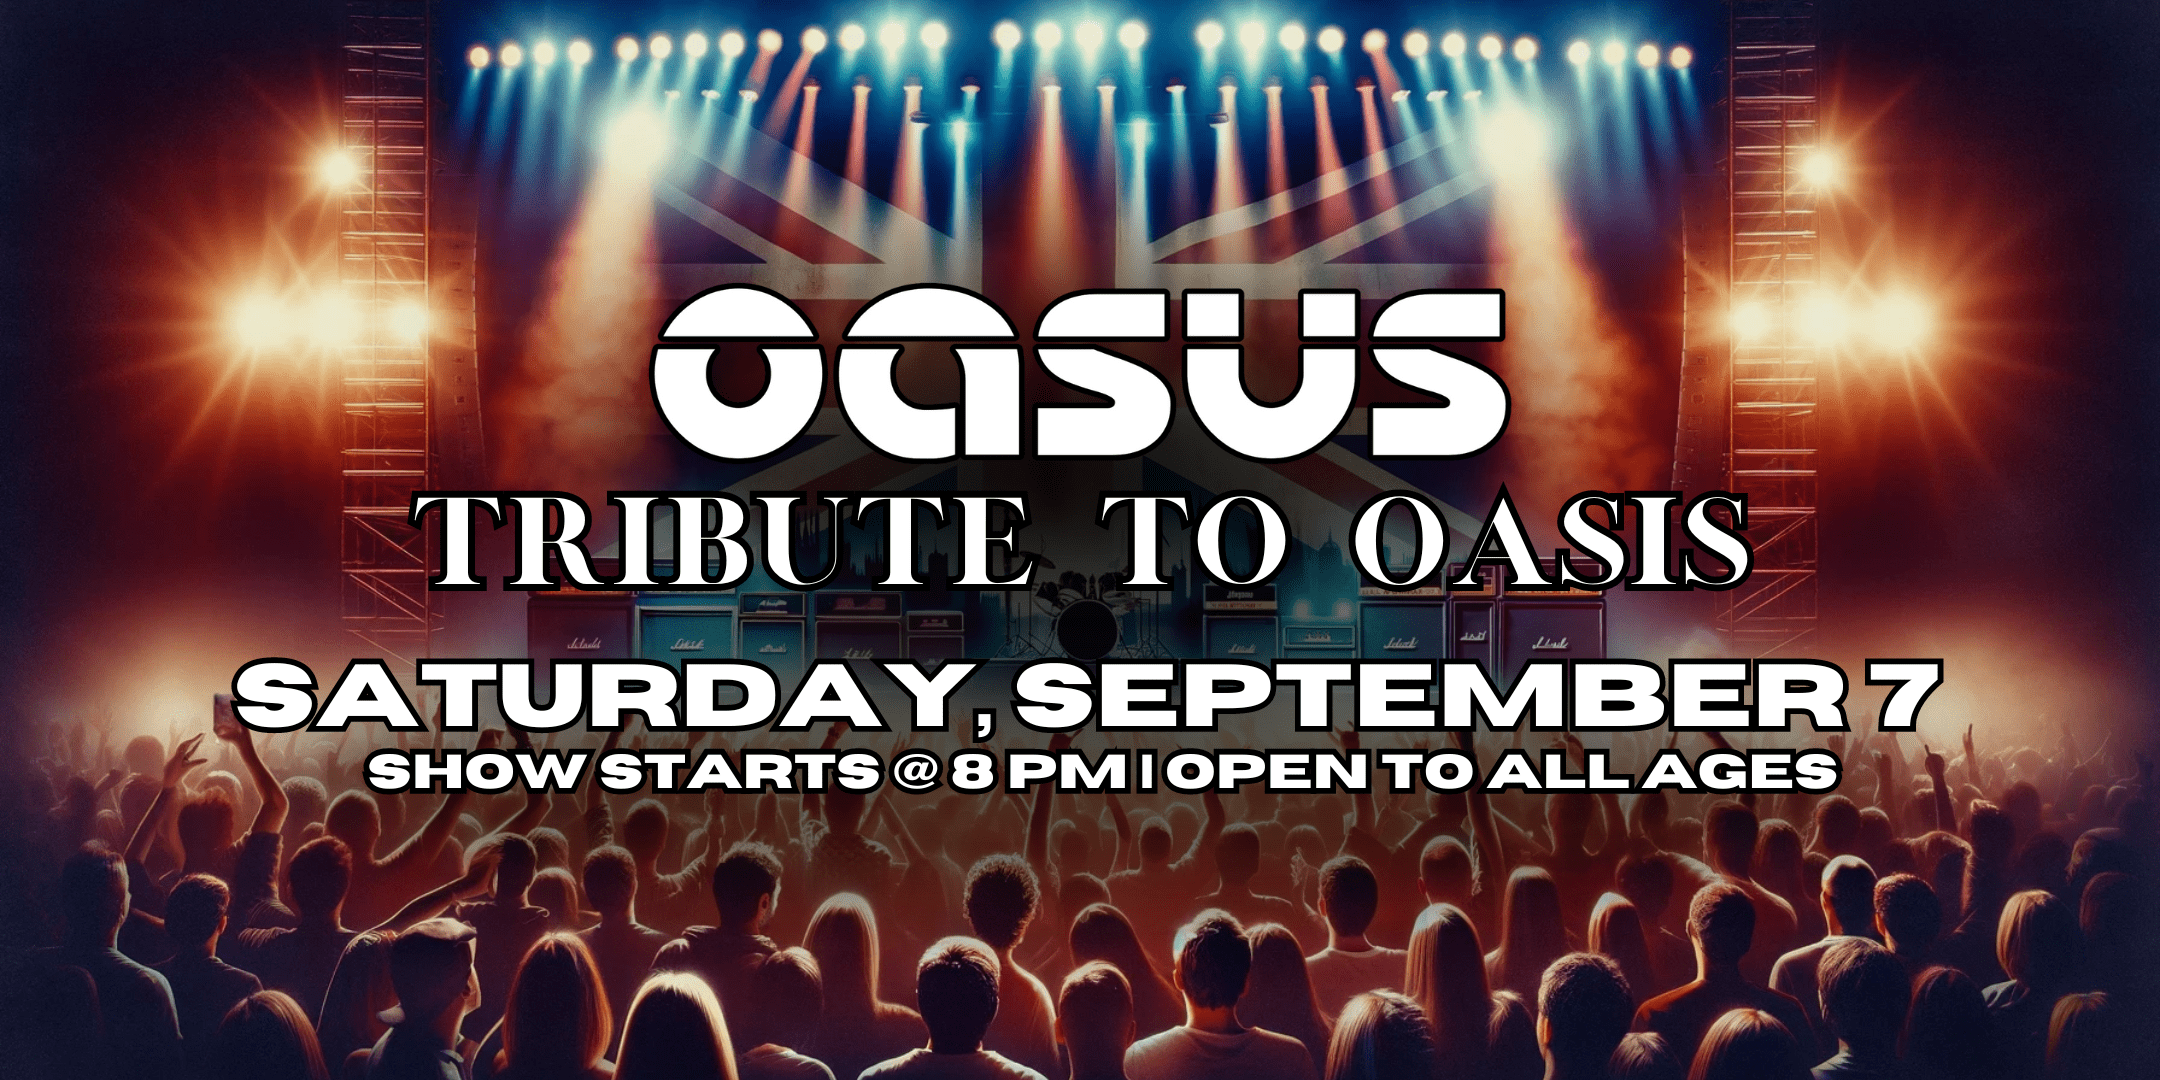 Village Sports Bar Presents: Oasus, Tribute to Oasis